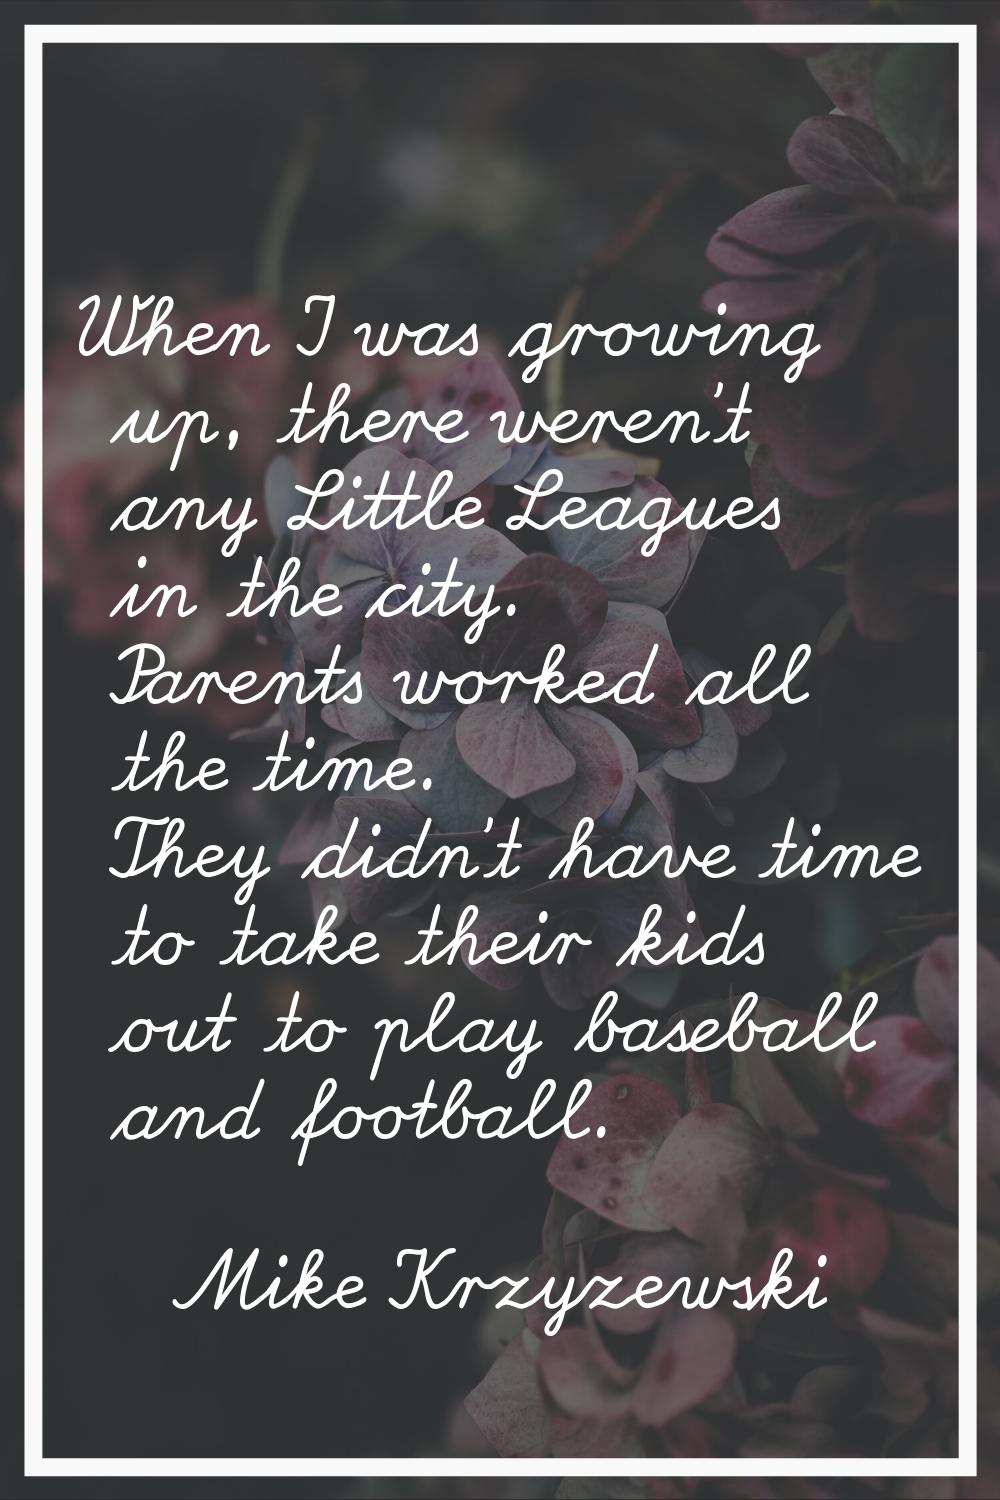 When I was growing up, there weren't any Little Leagues in the city. Parents worked all the time. T